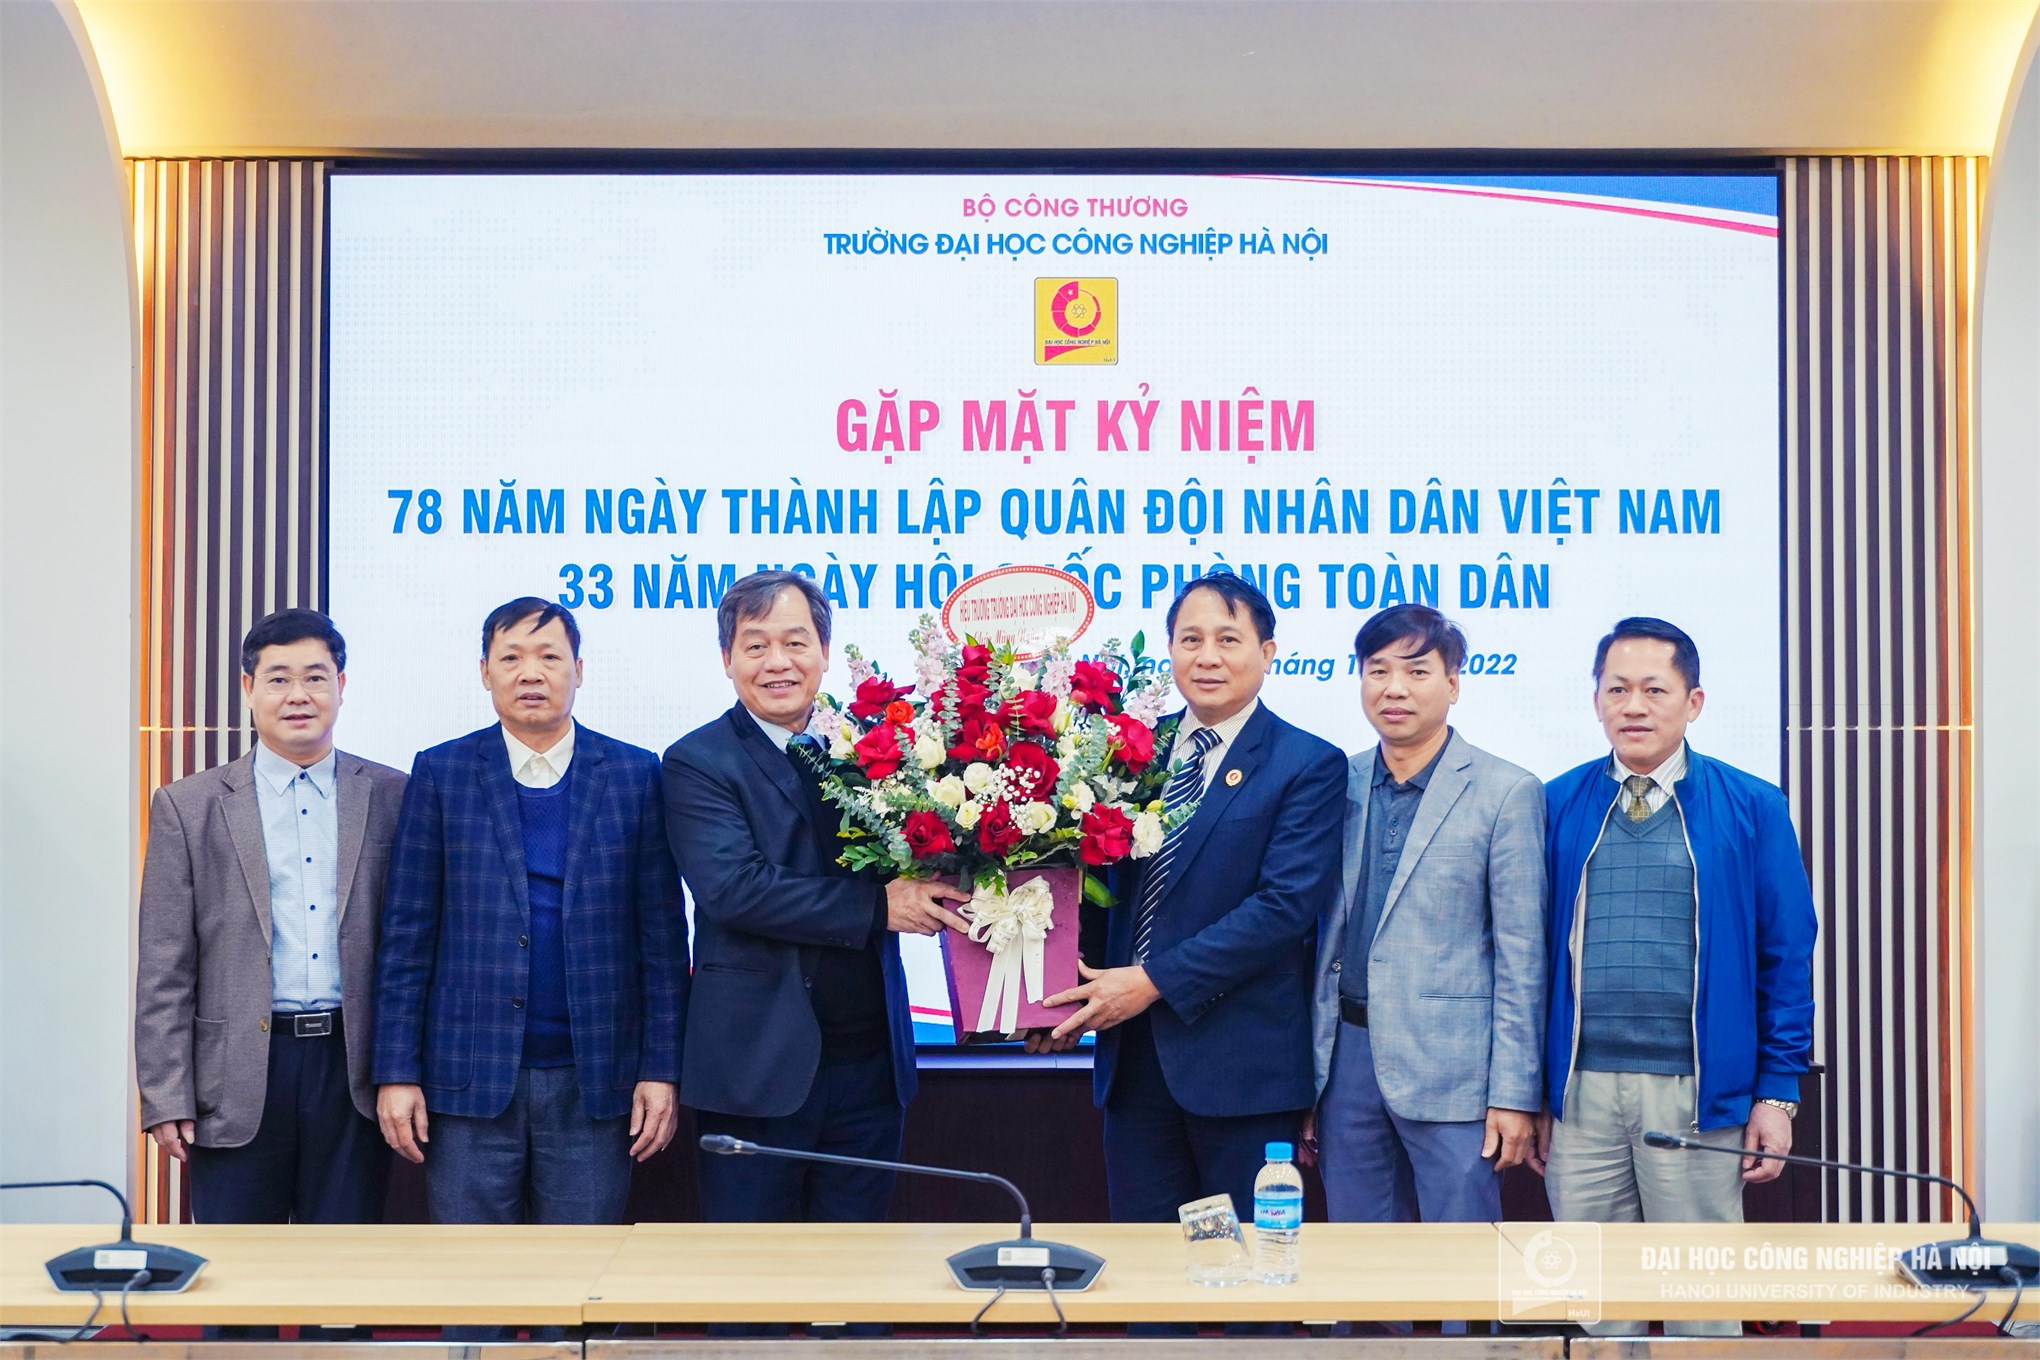 Assoc. Dr. Tran Duc Quy - Secretary of the Party Committee, and Rector of Hanoi University of Industry presents flowers to congratulate representatives of veterans of the university